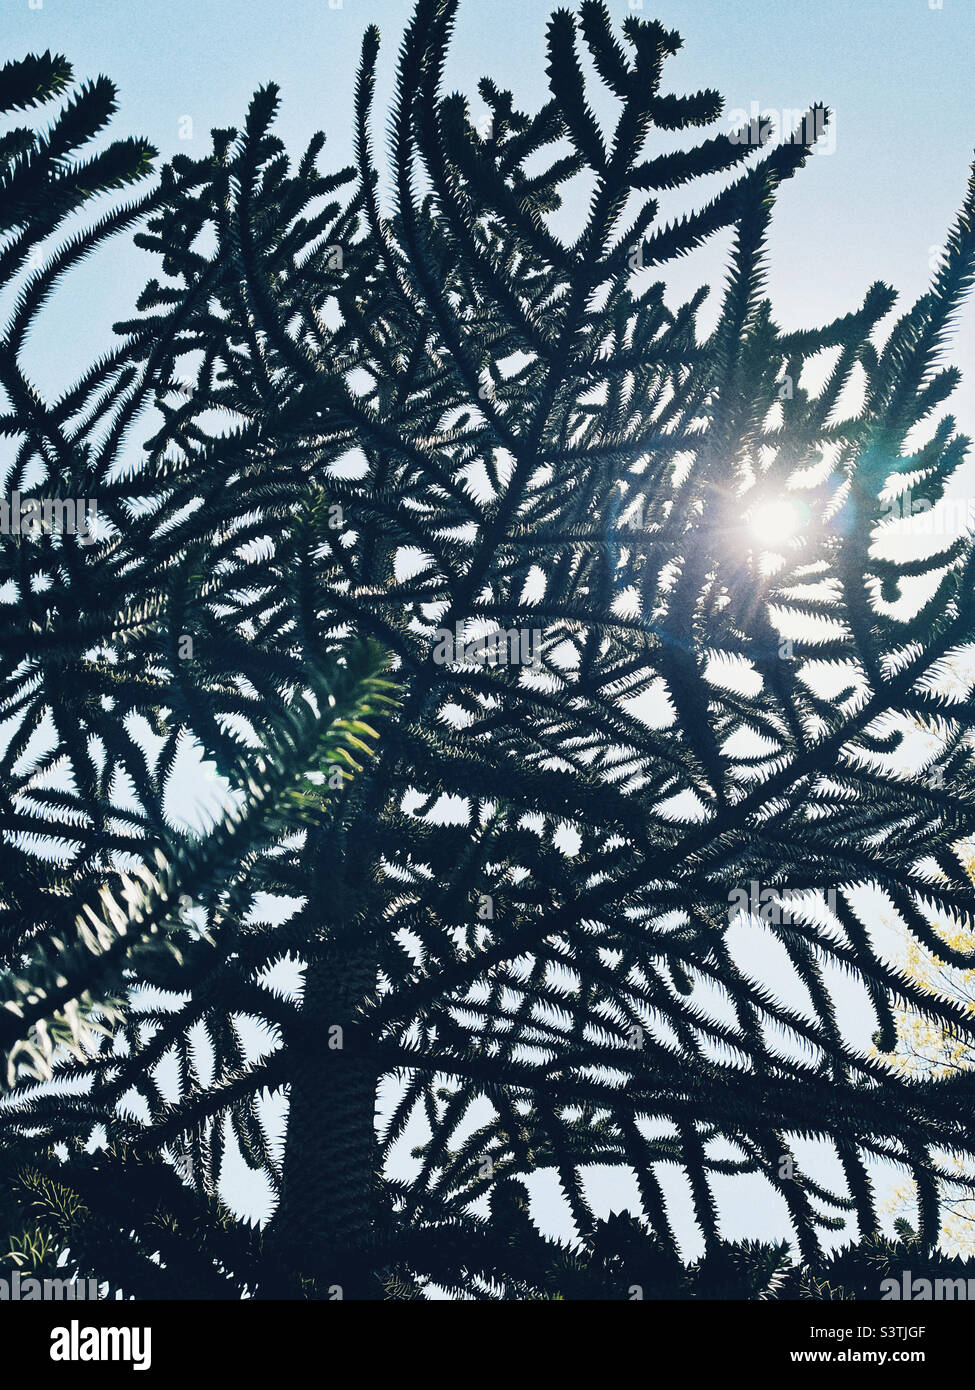 Monkey puzzle or araucaria tree silhouette against the sun Stock Photo